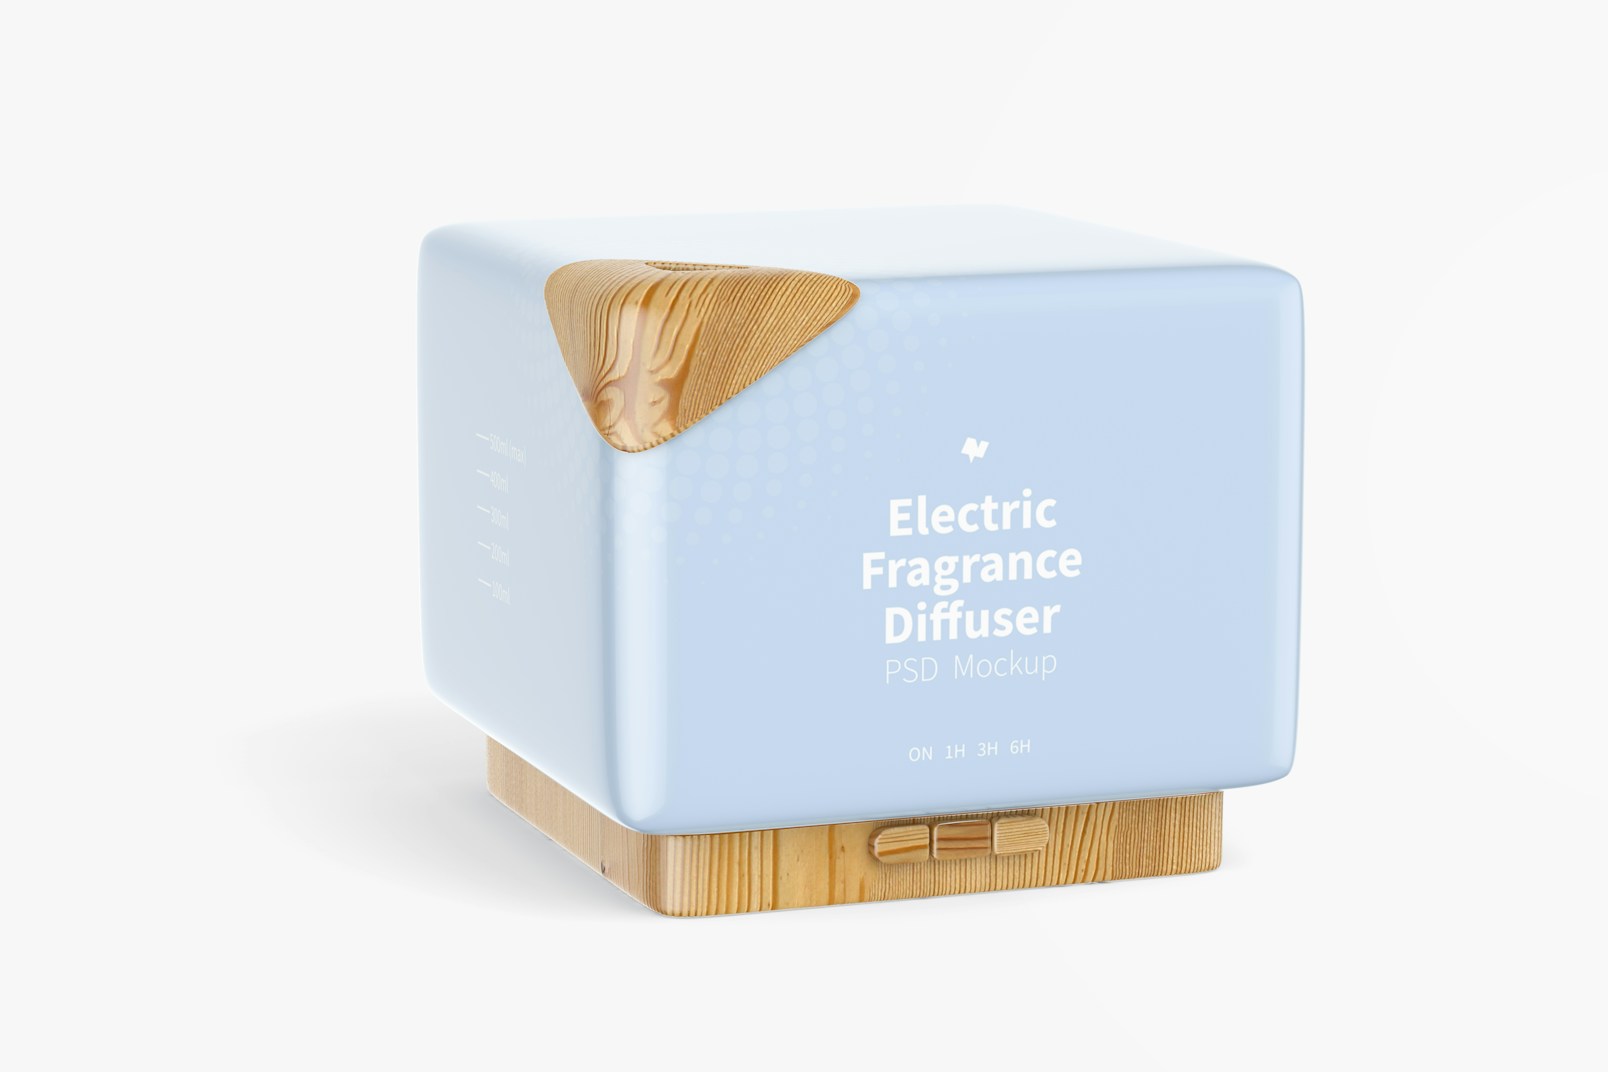 Electric Fragrance Diffuser Mockup, Perspective